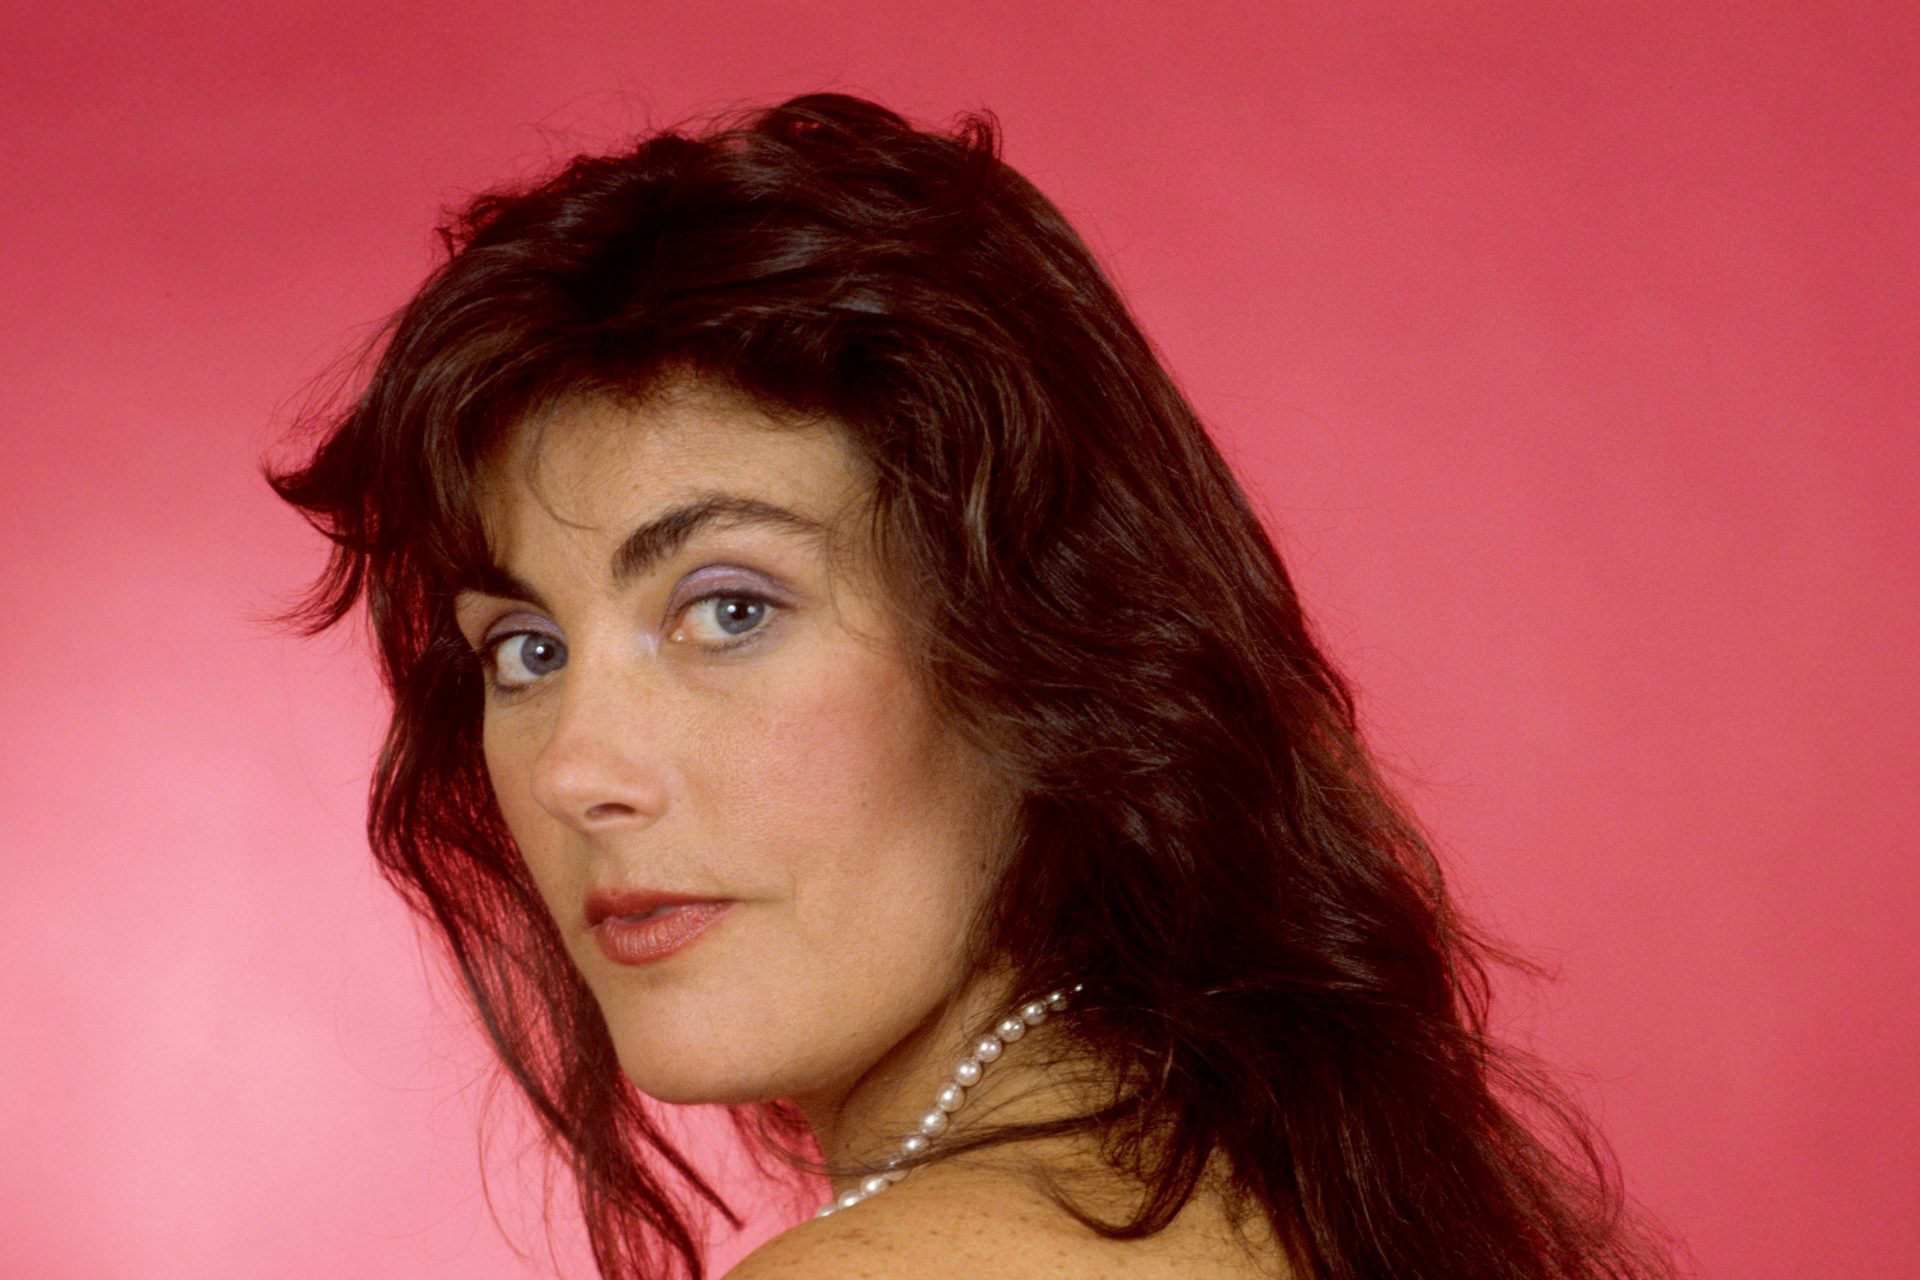 Obit for pop star Laura Branigan corrected, 12 years later